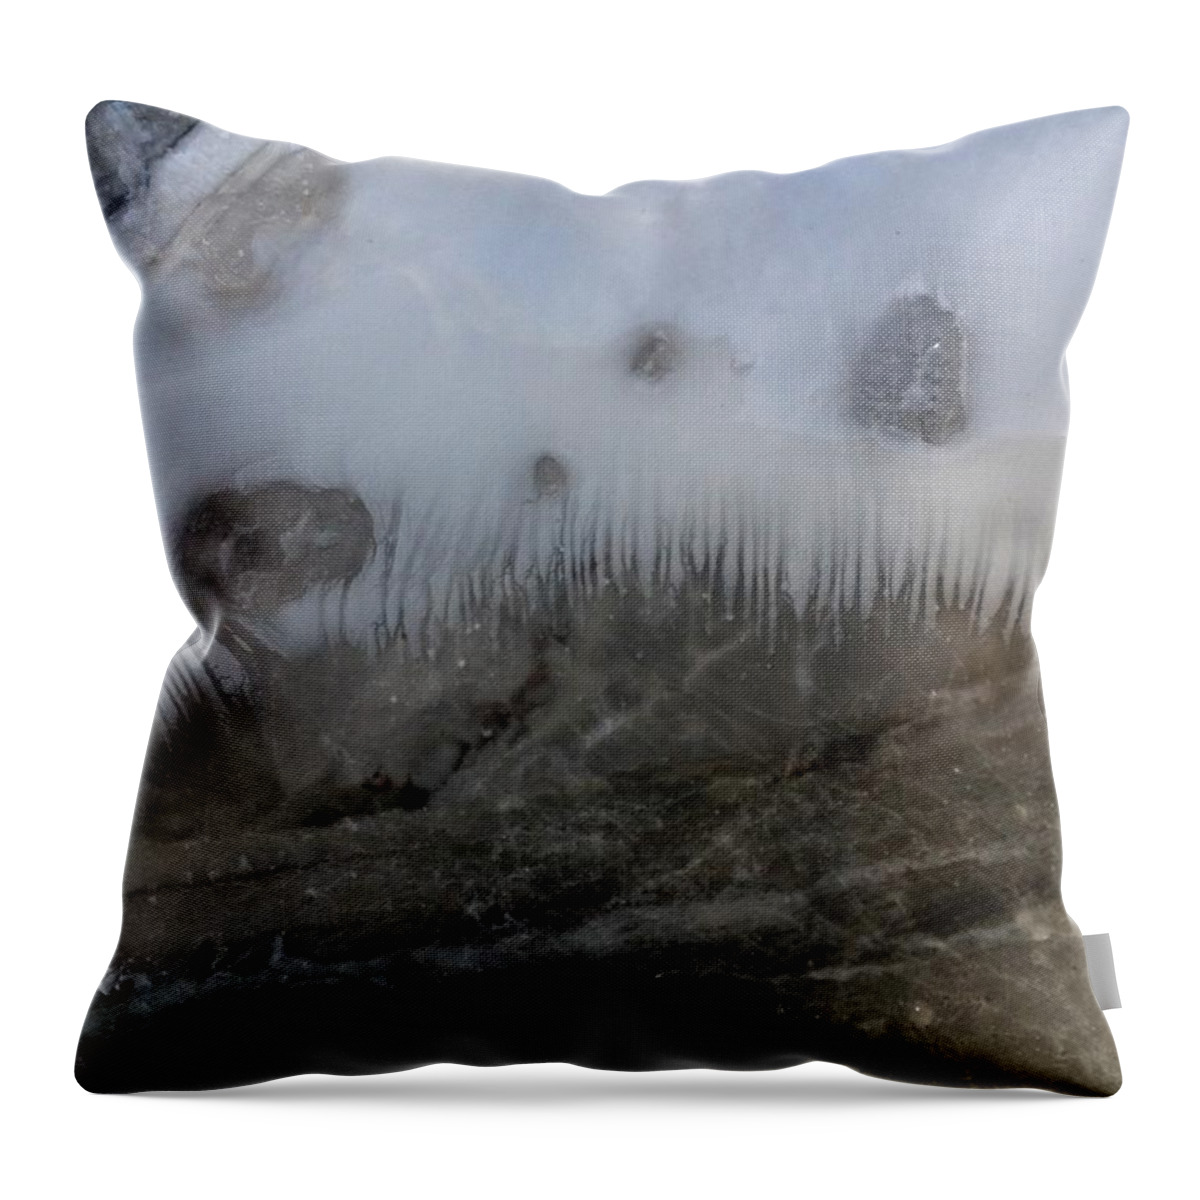 Abstract Throw Pillow featuring the painting Dalton deep sea fish toof by Gyula Julian Lovas